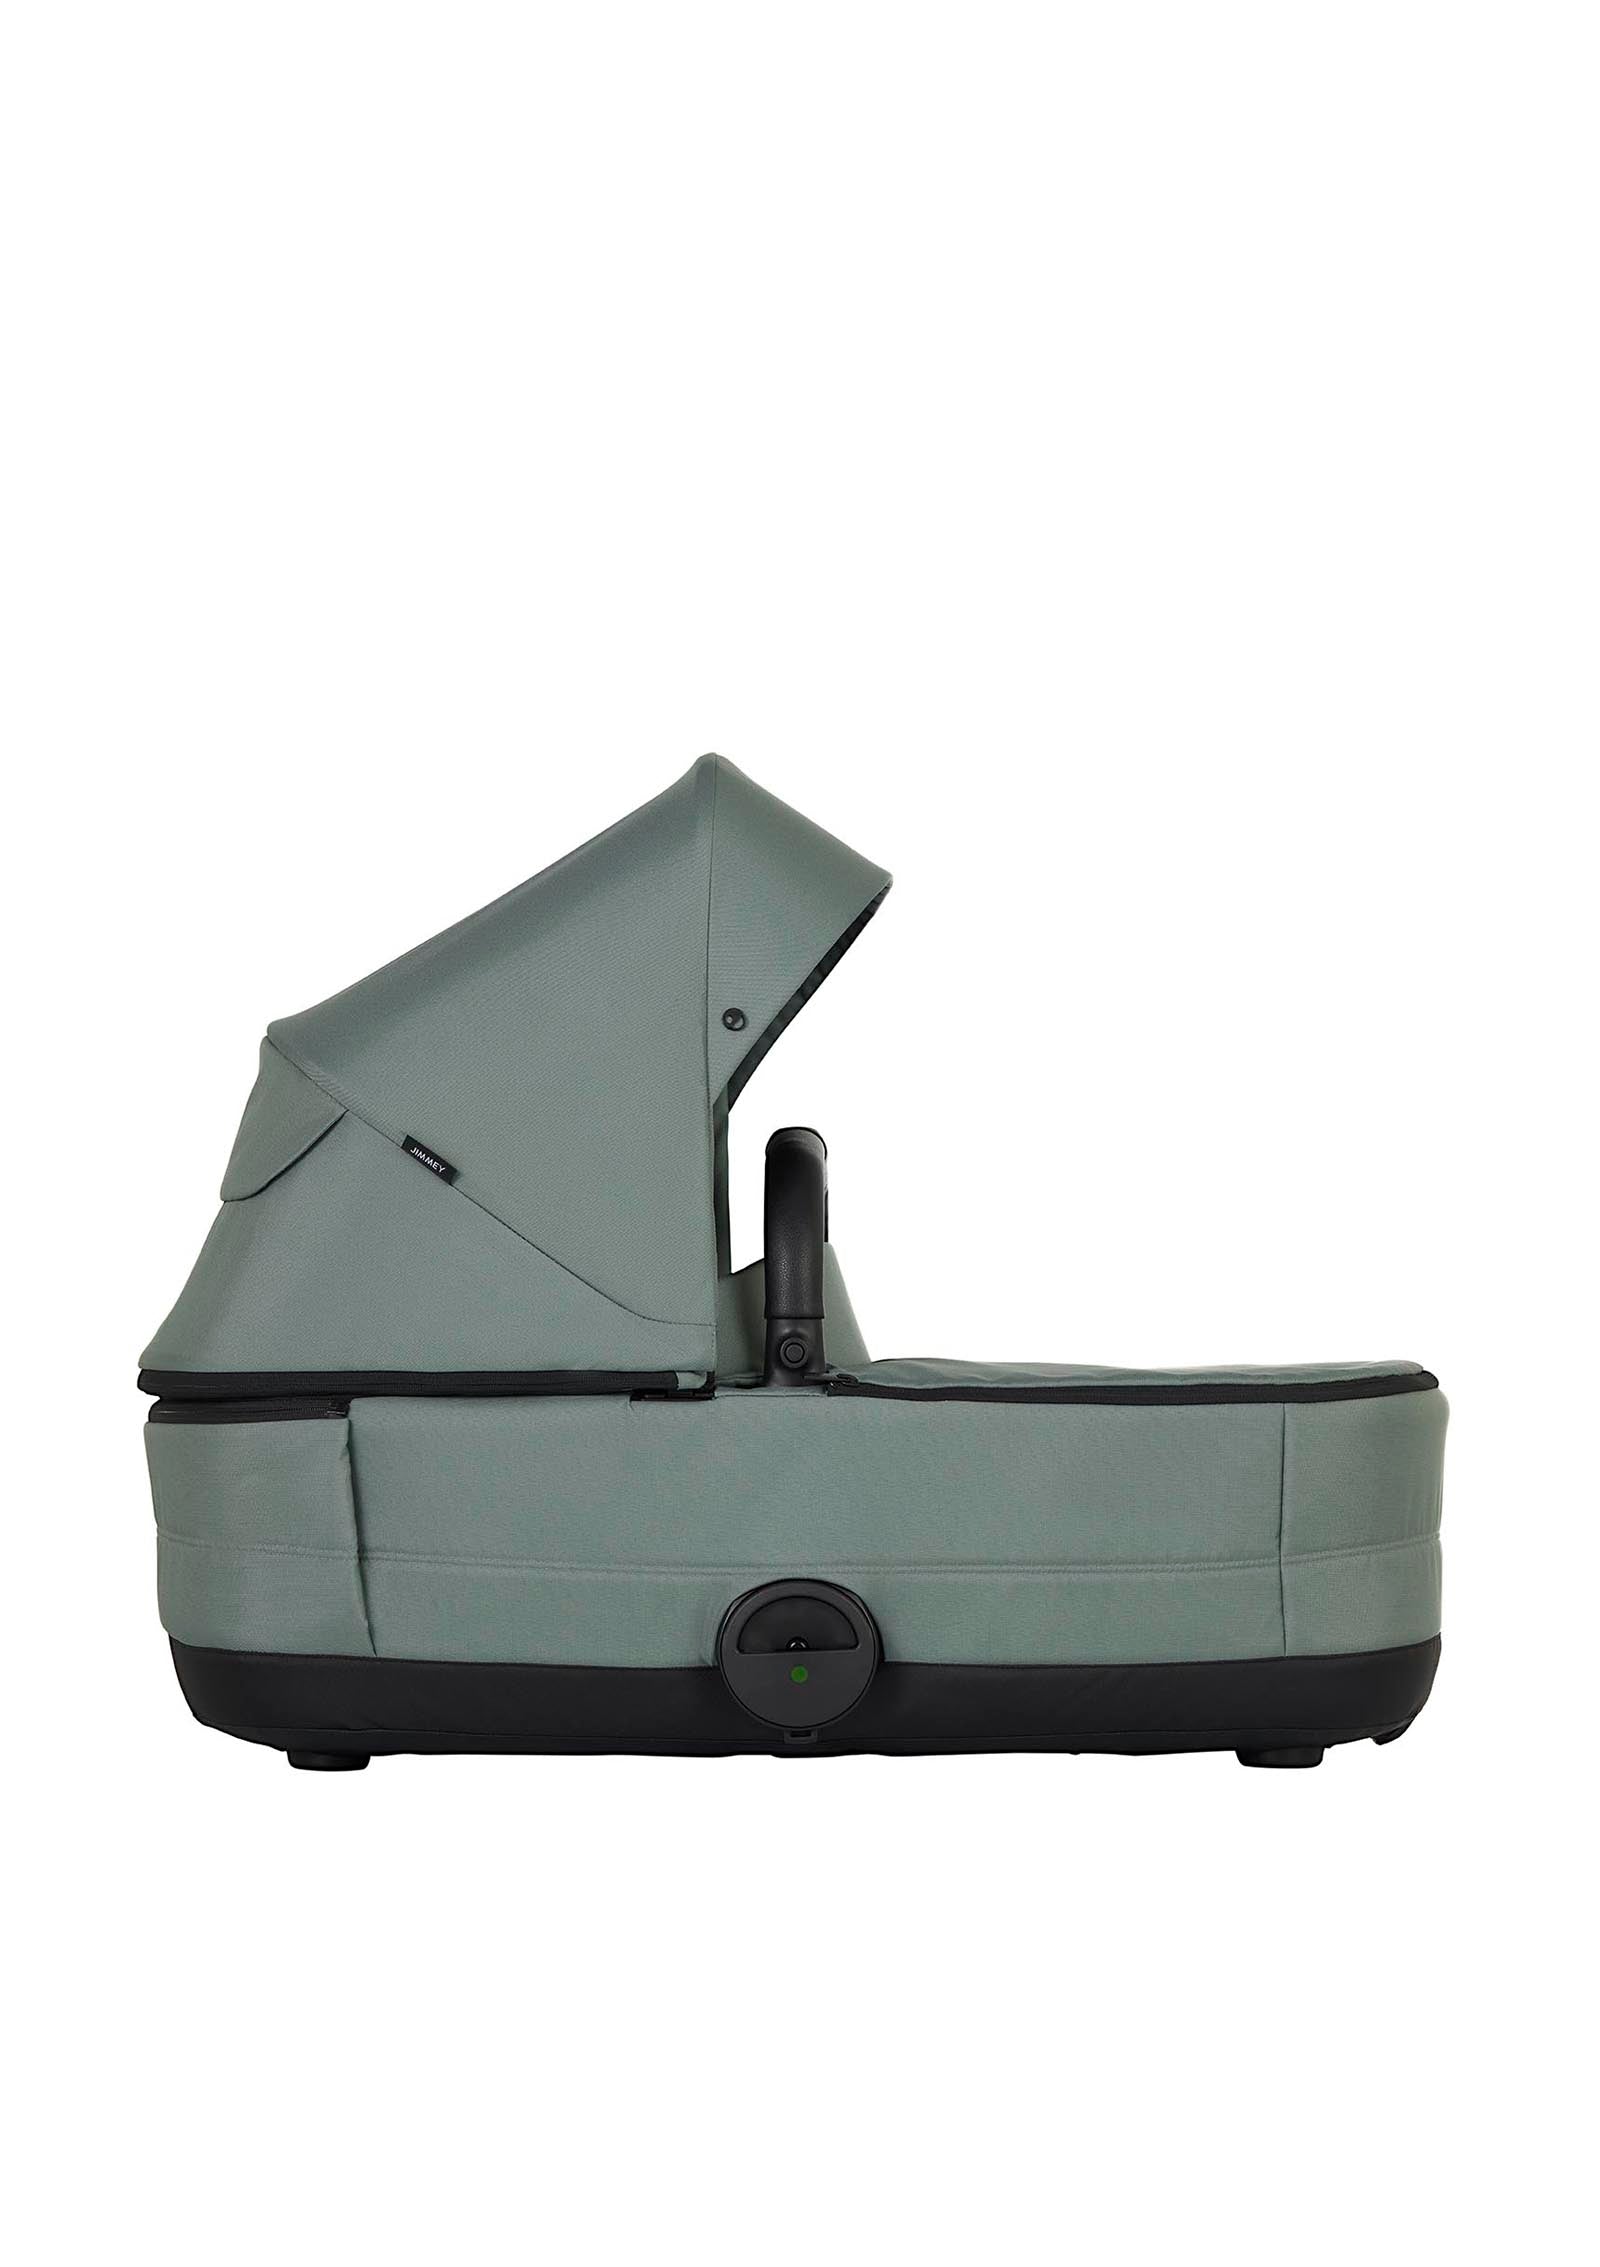 easywalker Jimmey Carrycot Thyme Green